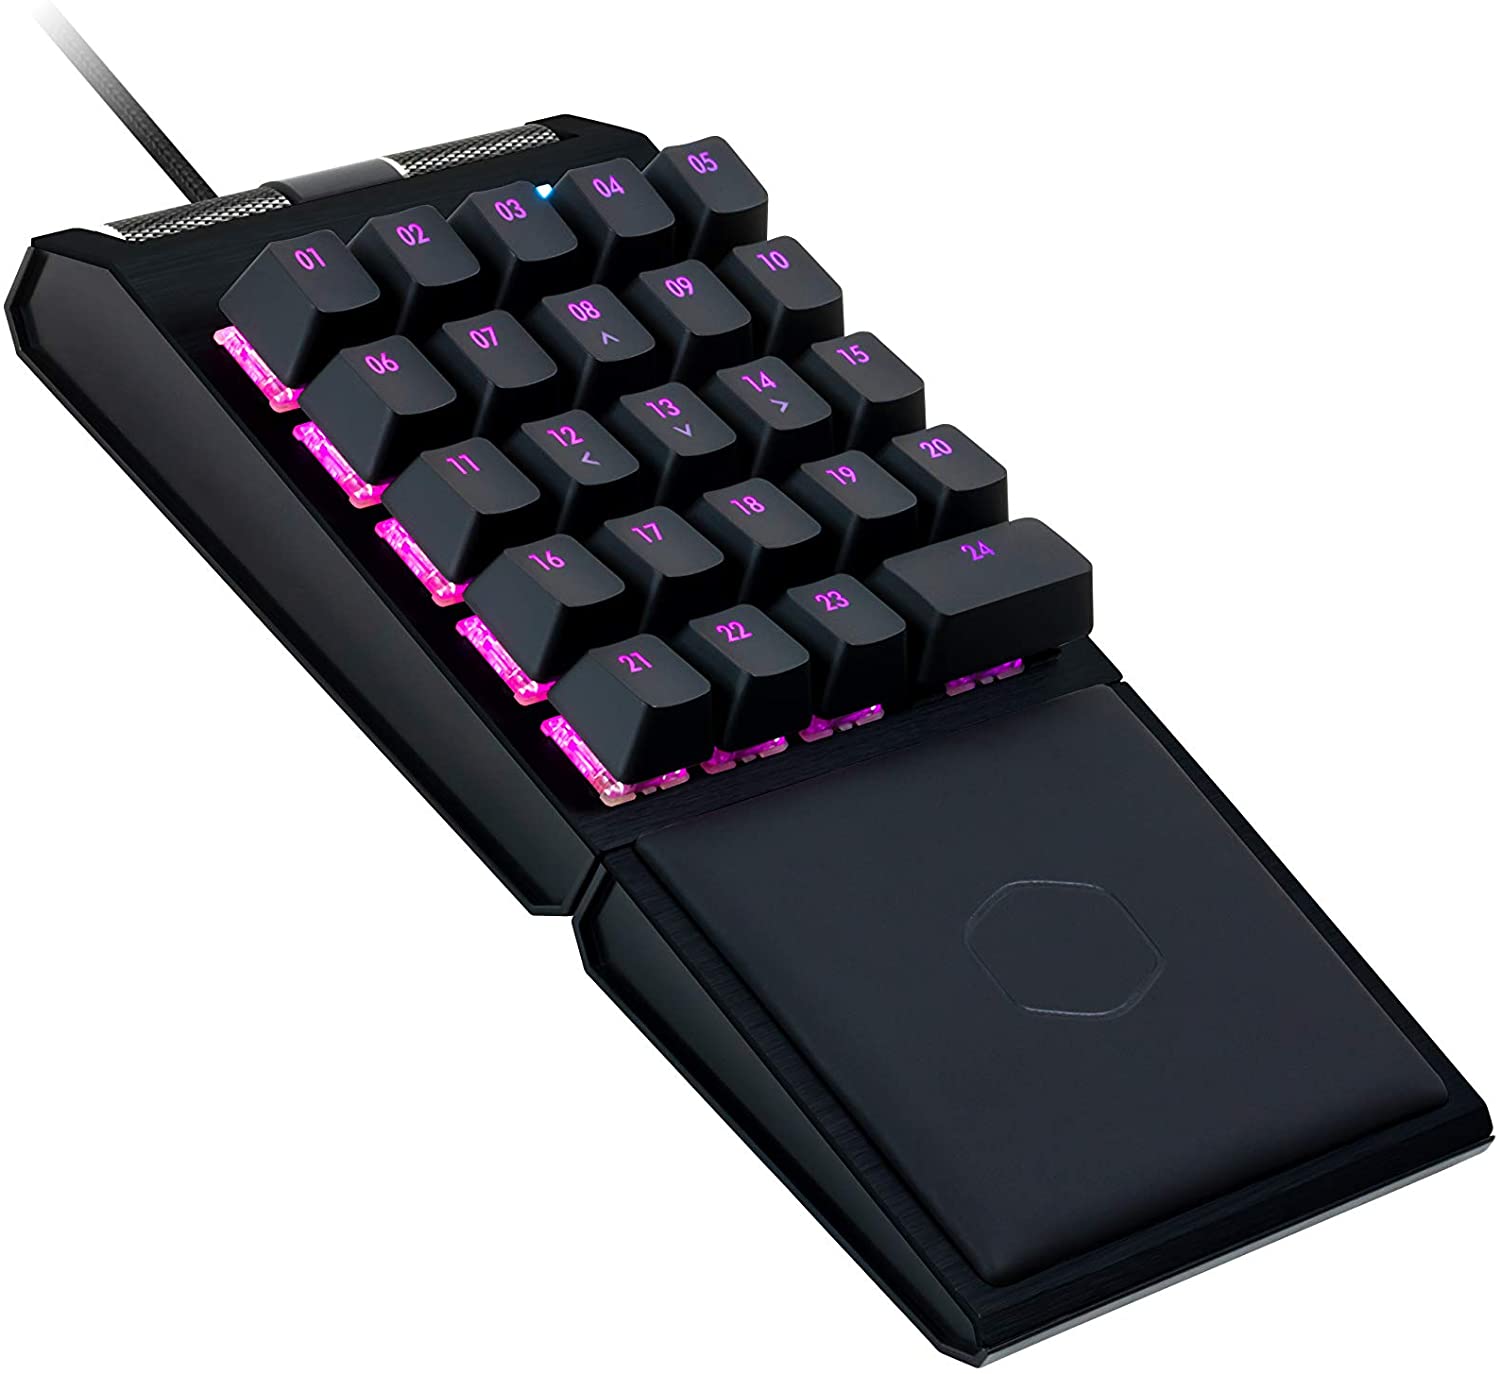 Cooler Master Control Pad with Aimpad Technology